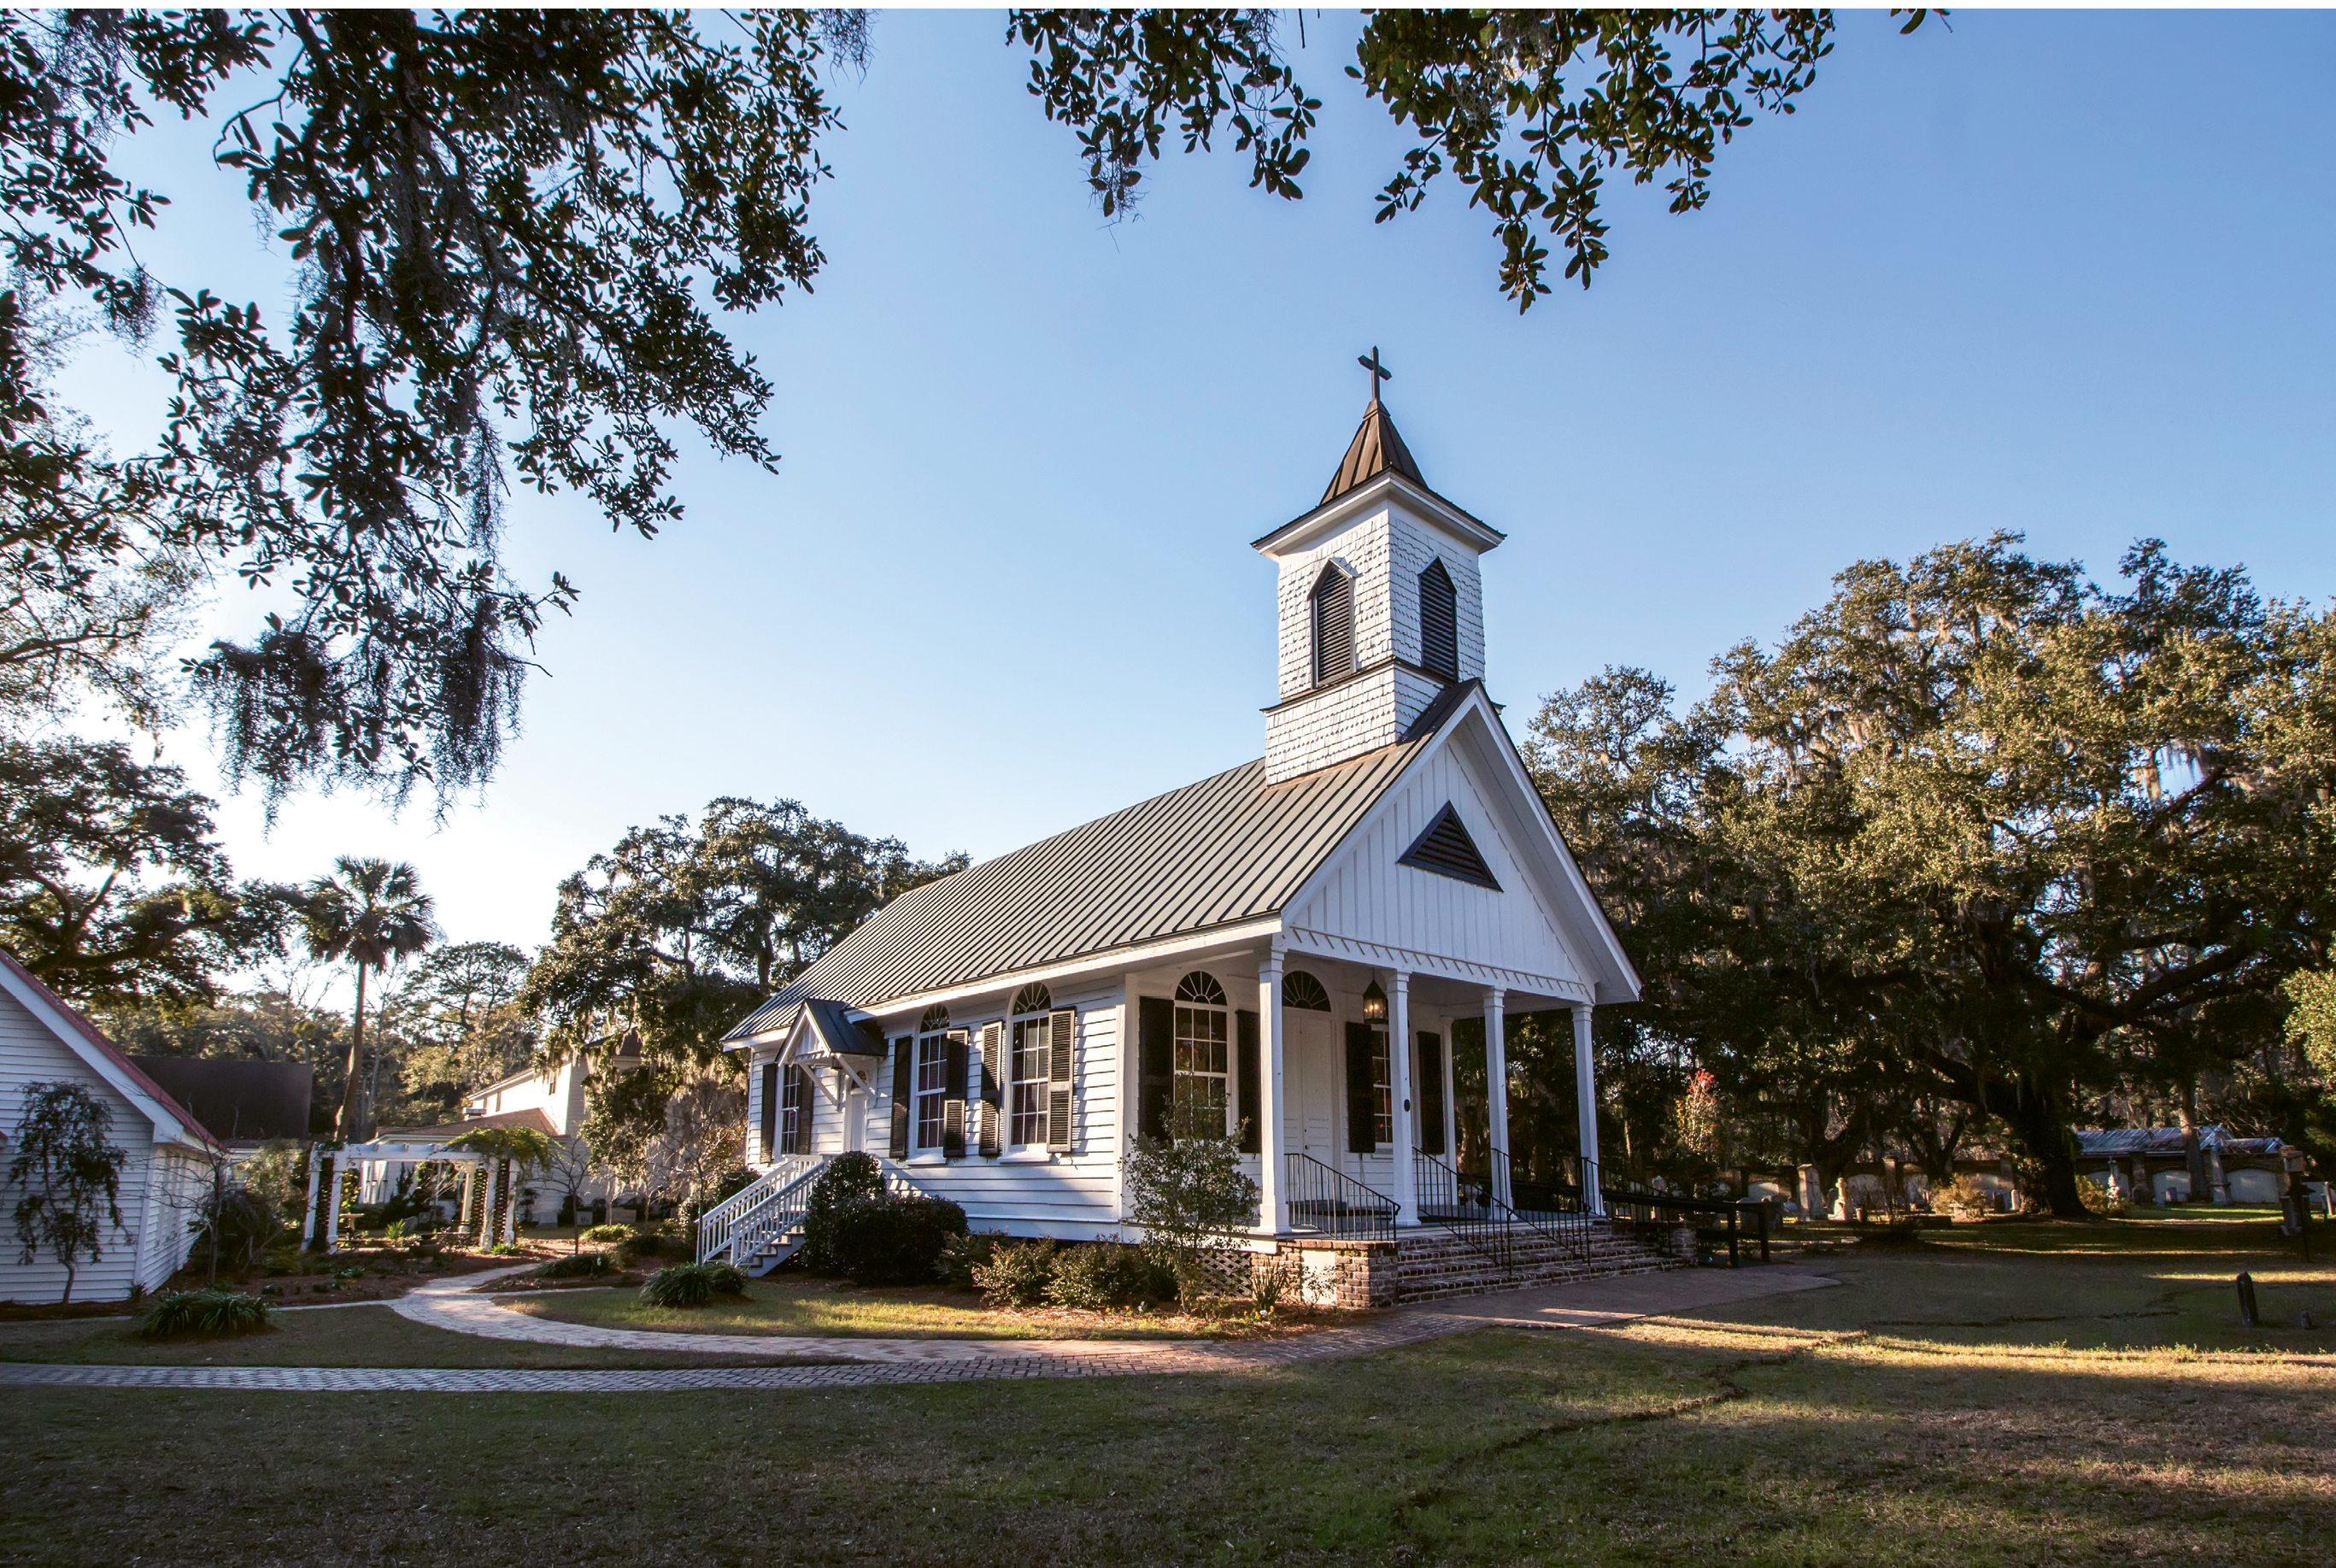 Trinity Episcopal Church, Edisto Island: The cross on the steeple was given by Eldon D. Hunter in honor of his mother, Virginia Griffen Hunter (1869-1935).